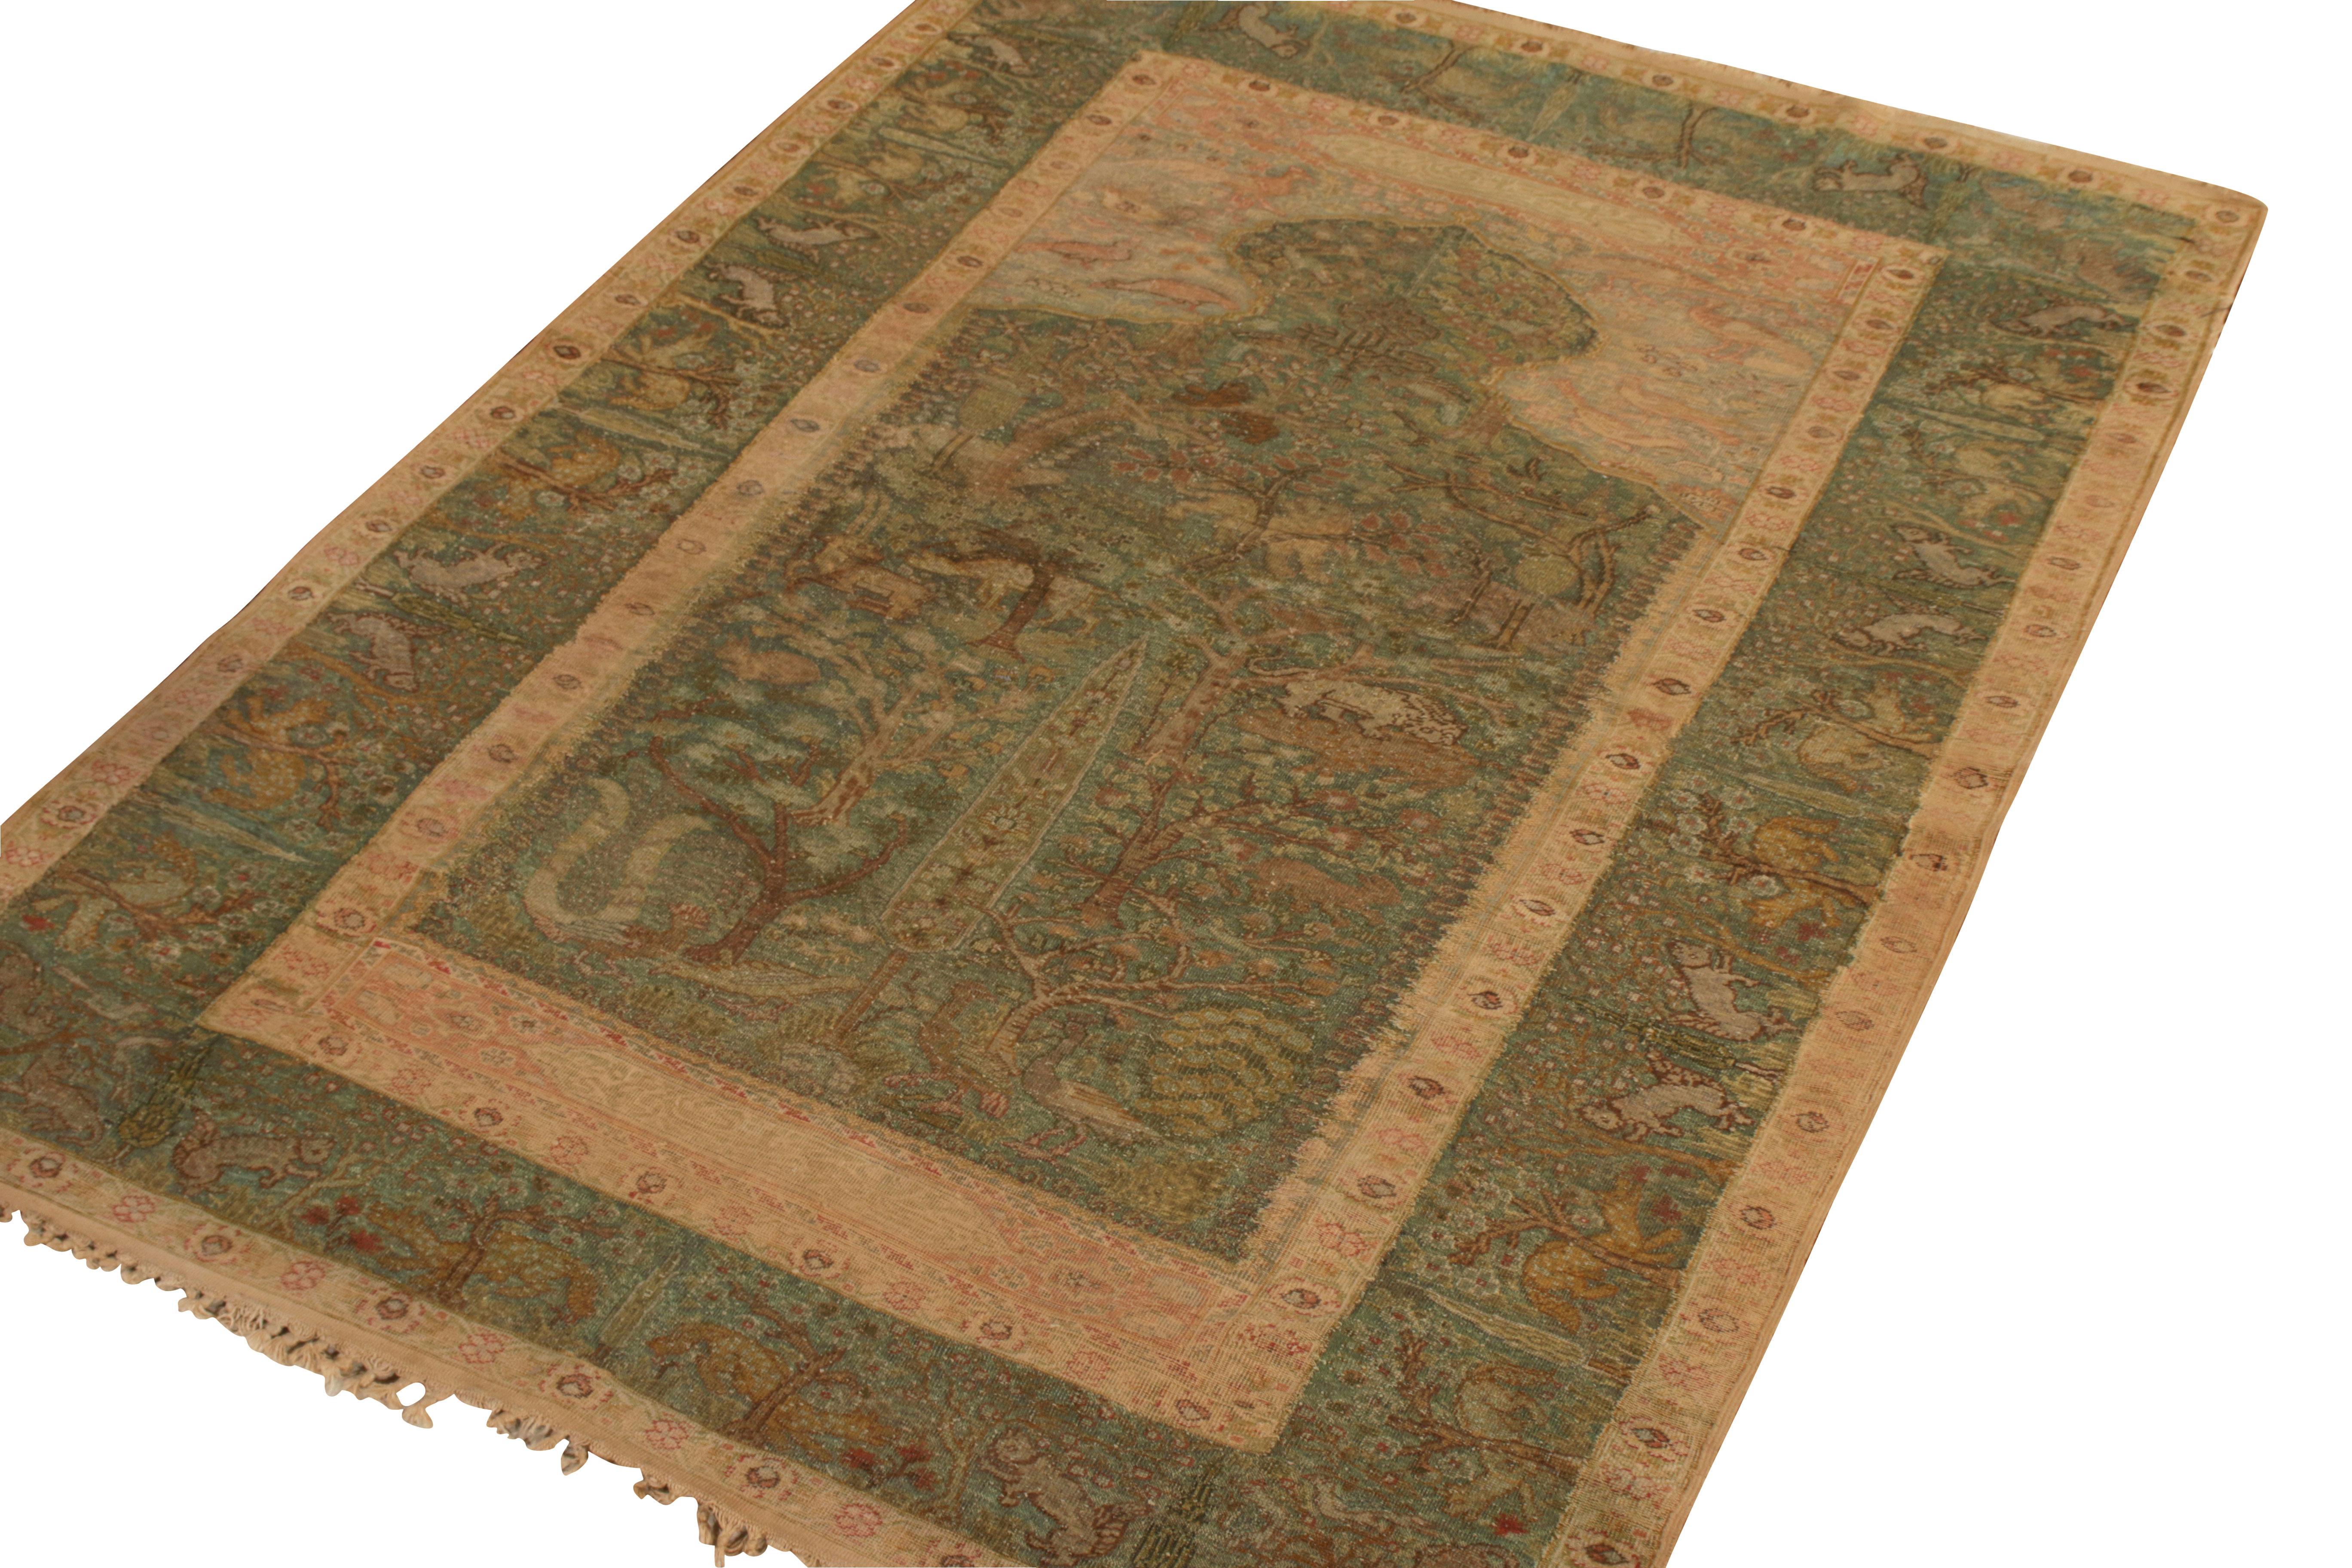 Hand knotted in a rare metallic thread with silk and originating from Turkey circa 1920-1930, this antique 4x6 Kayseri rug is an artful piece of pictorial representation. The Fine craftsmanship draws attention towards the intricacy that spans across